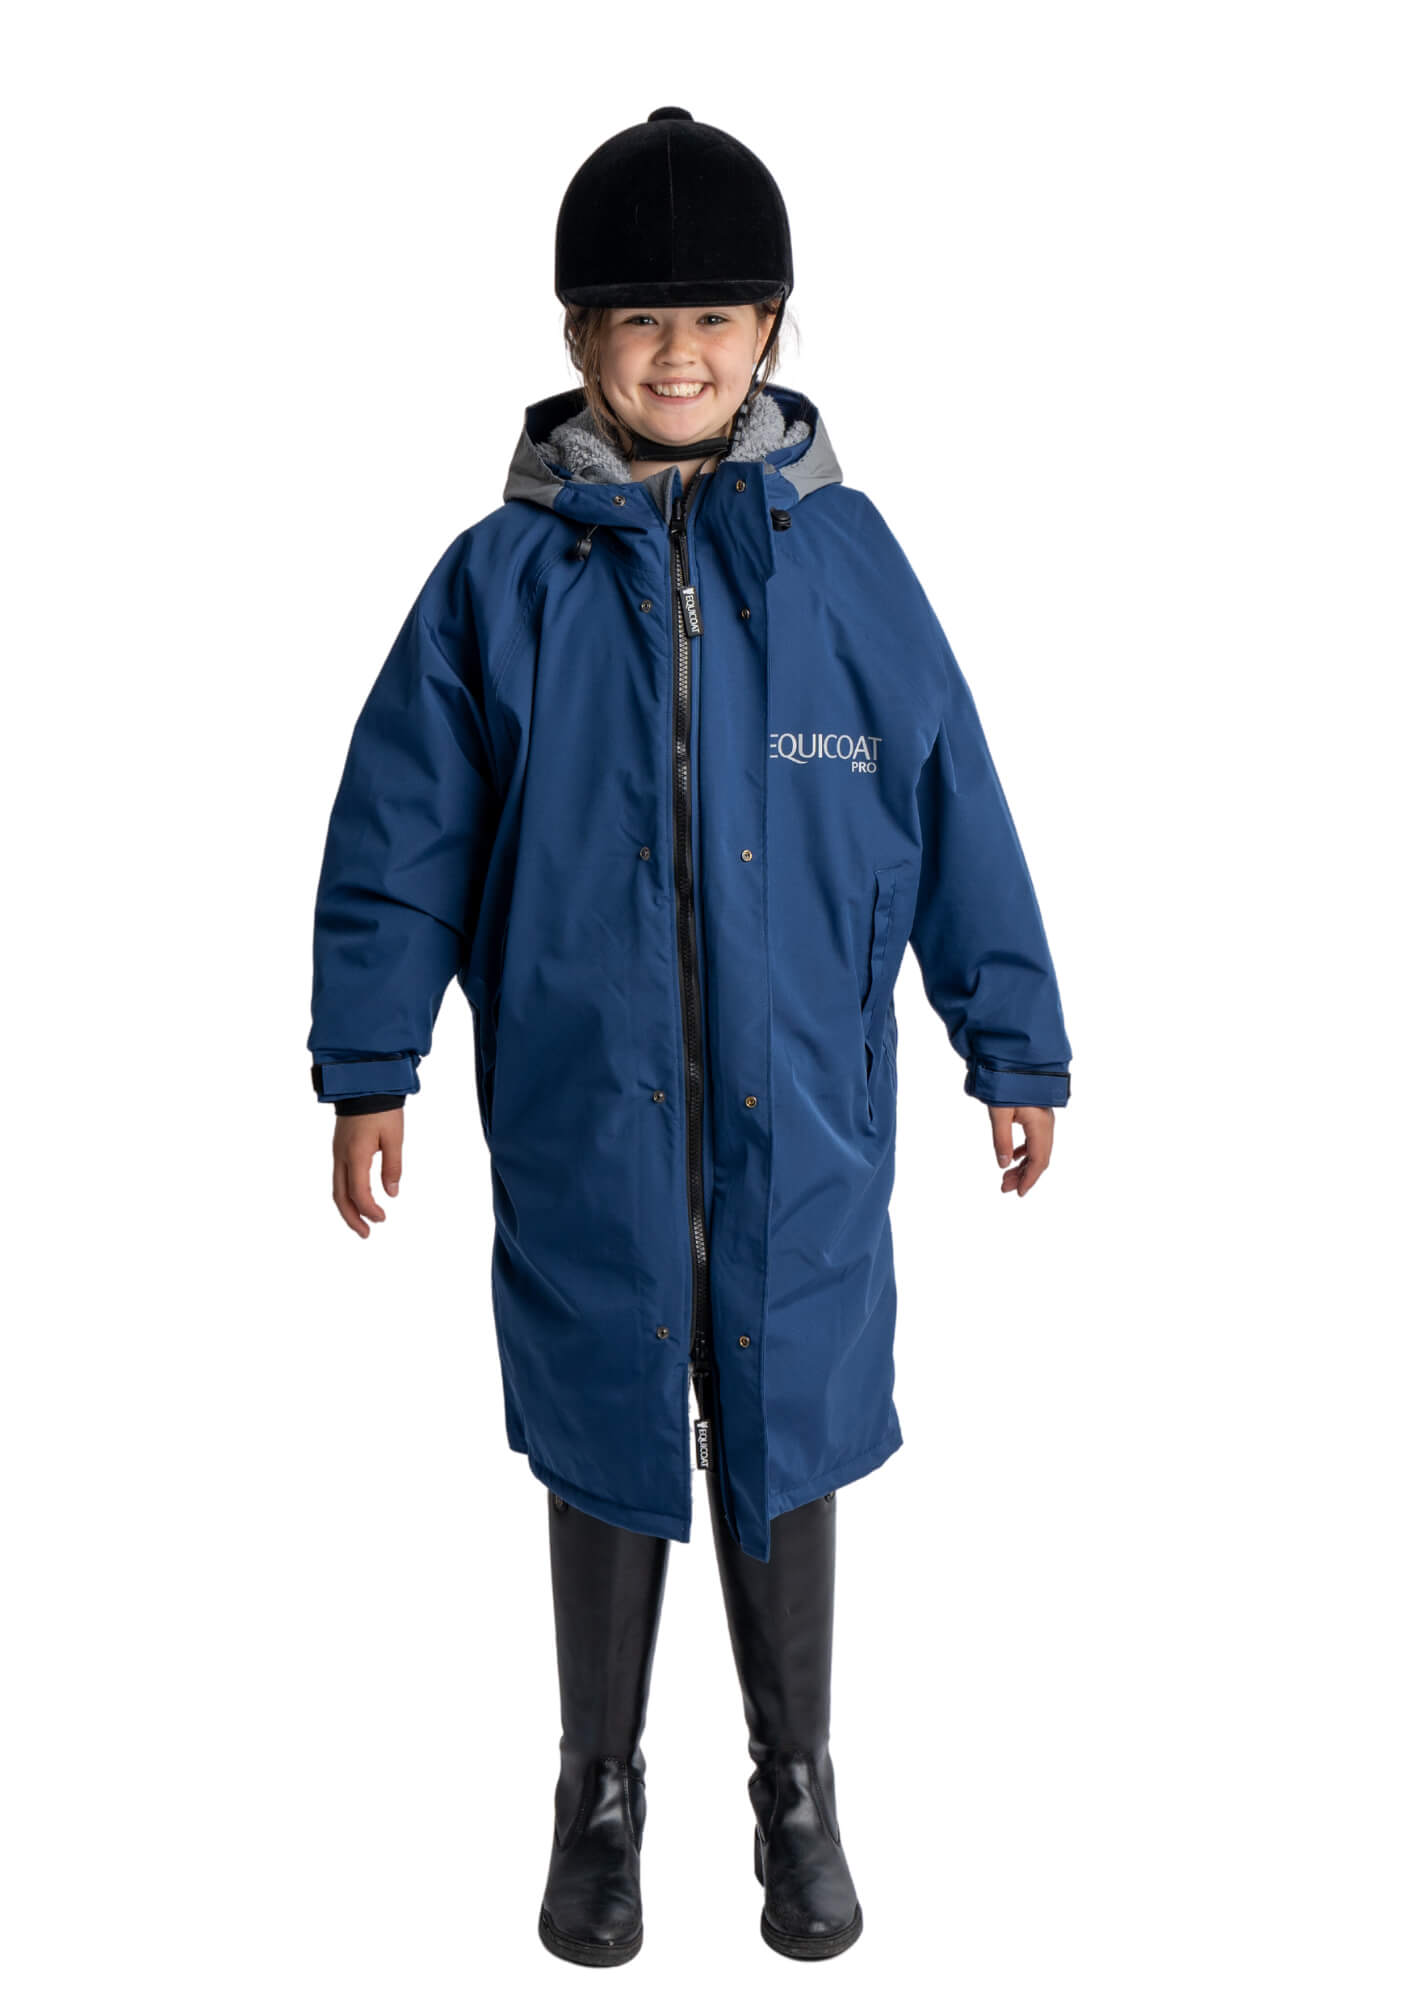 Equicoat Pro Kids Navy Front Poppers